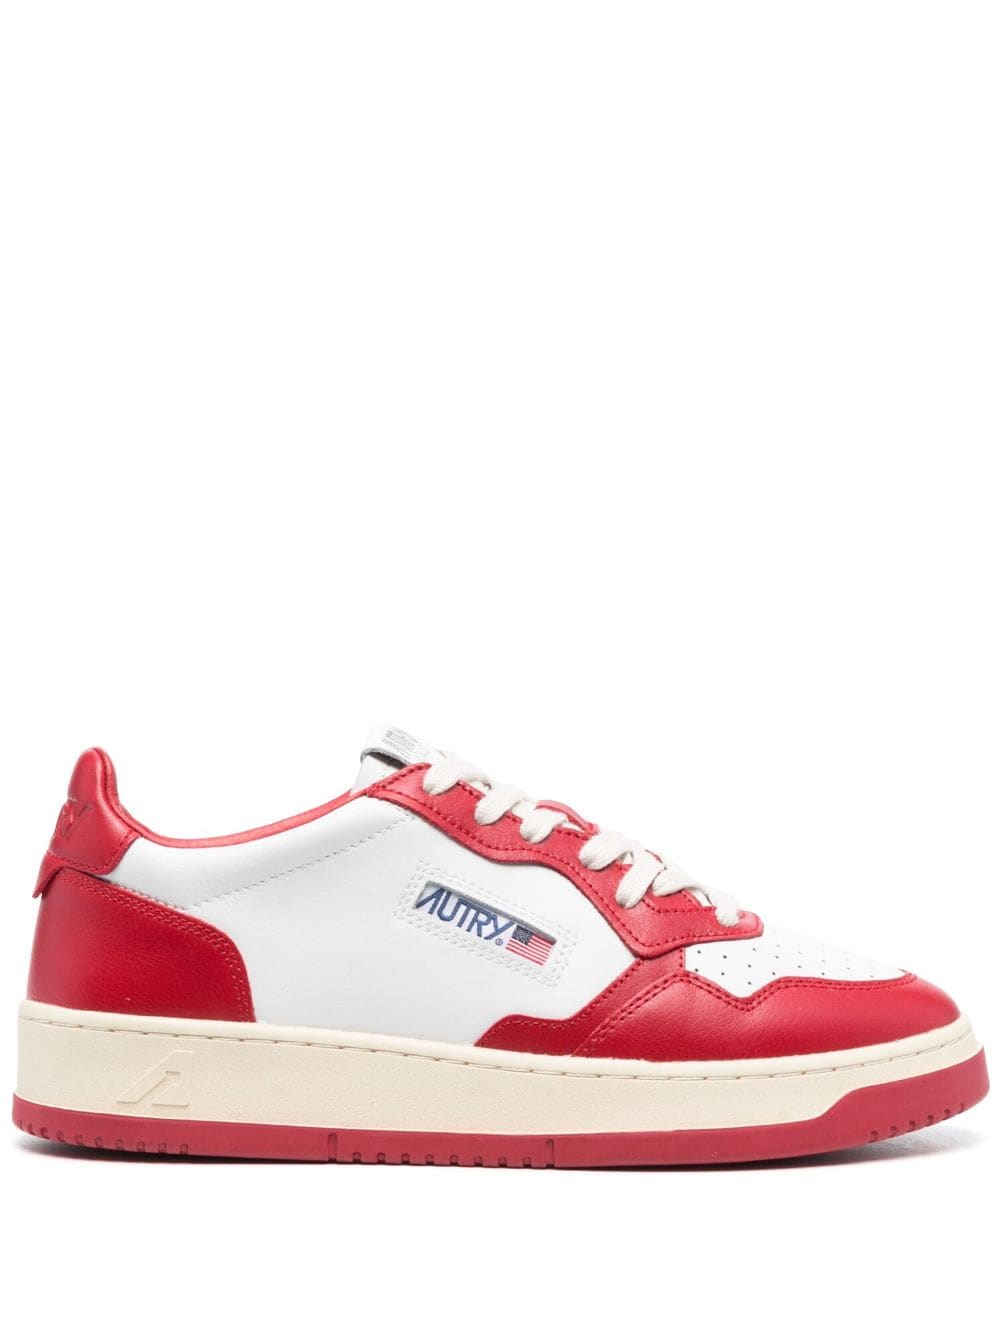 Autry Medalist colour-block leather sneakers - White